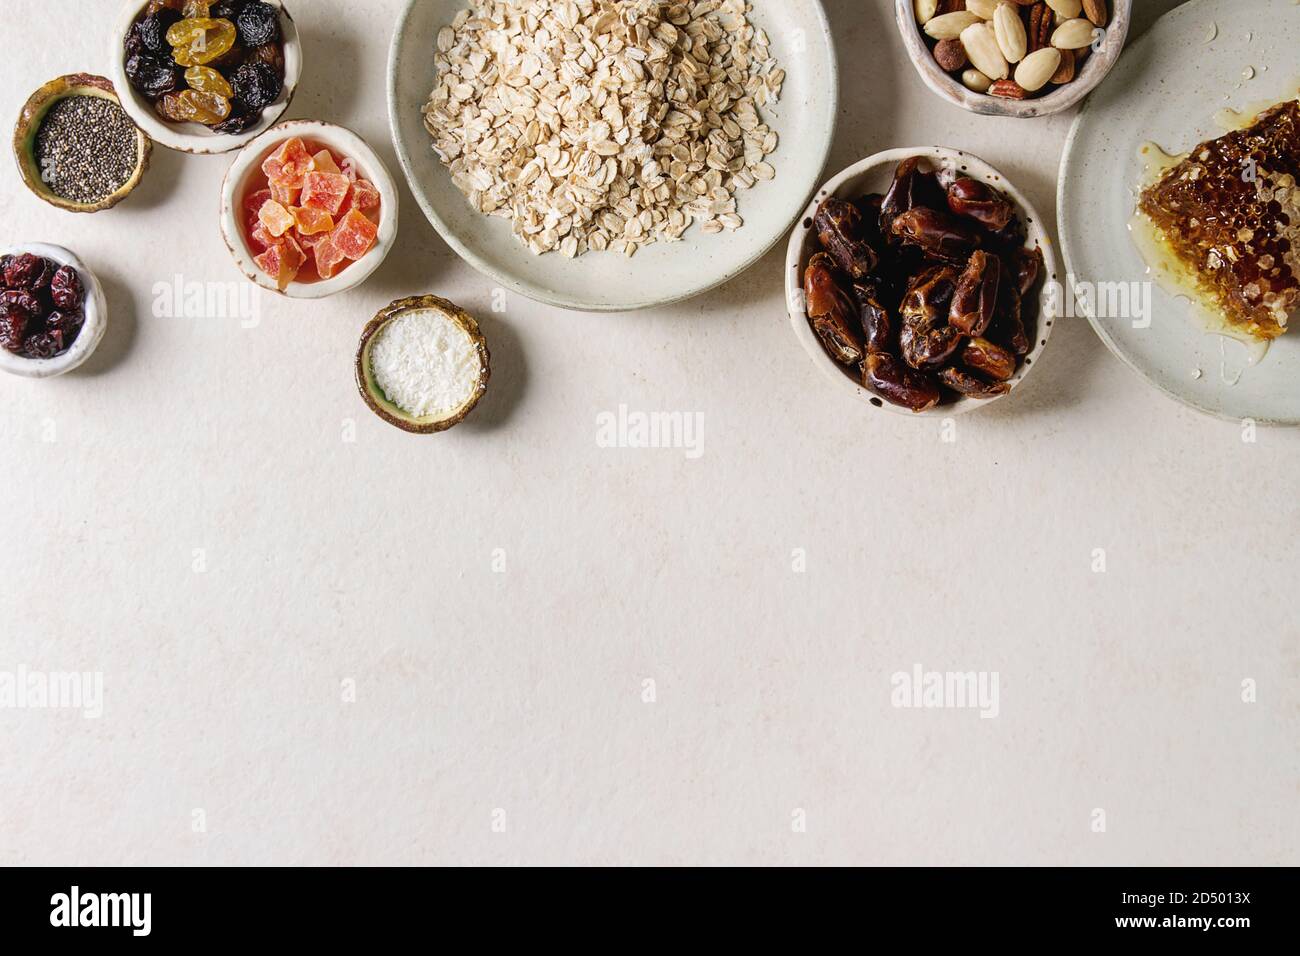 Variety of dried fruits, nuts, honey and oat flakes in ceramic bowls for cooking homemade healthy breakfast muesli or granola energy bars over white t Stock Photo